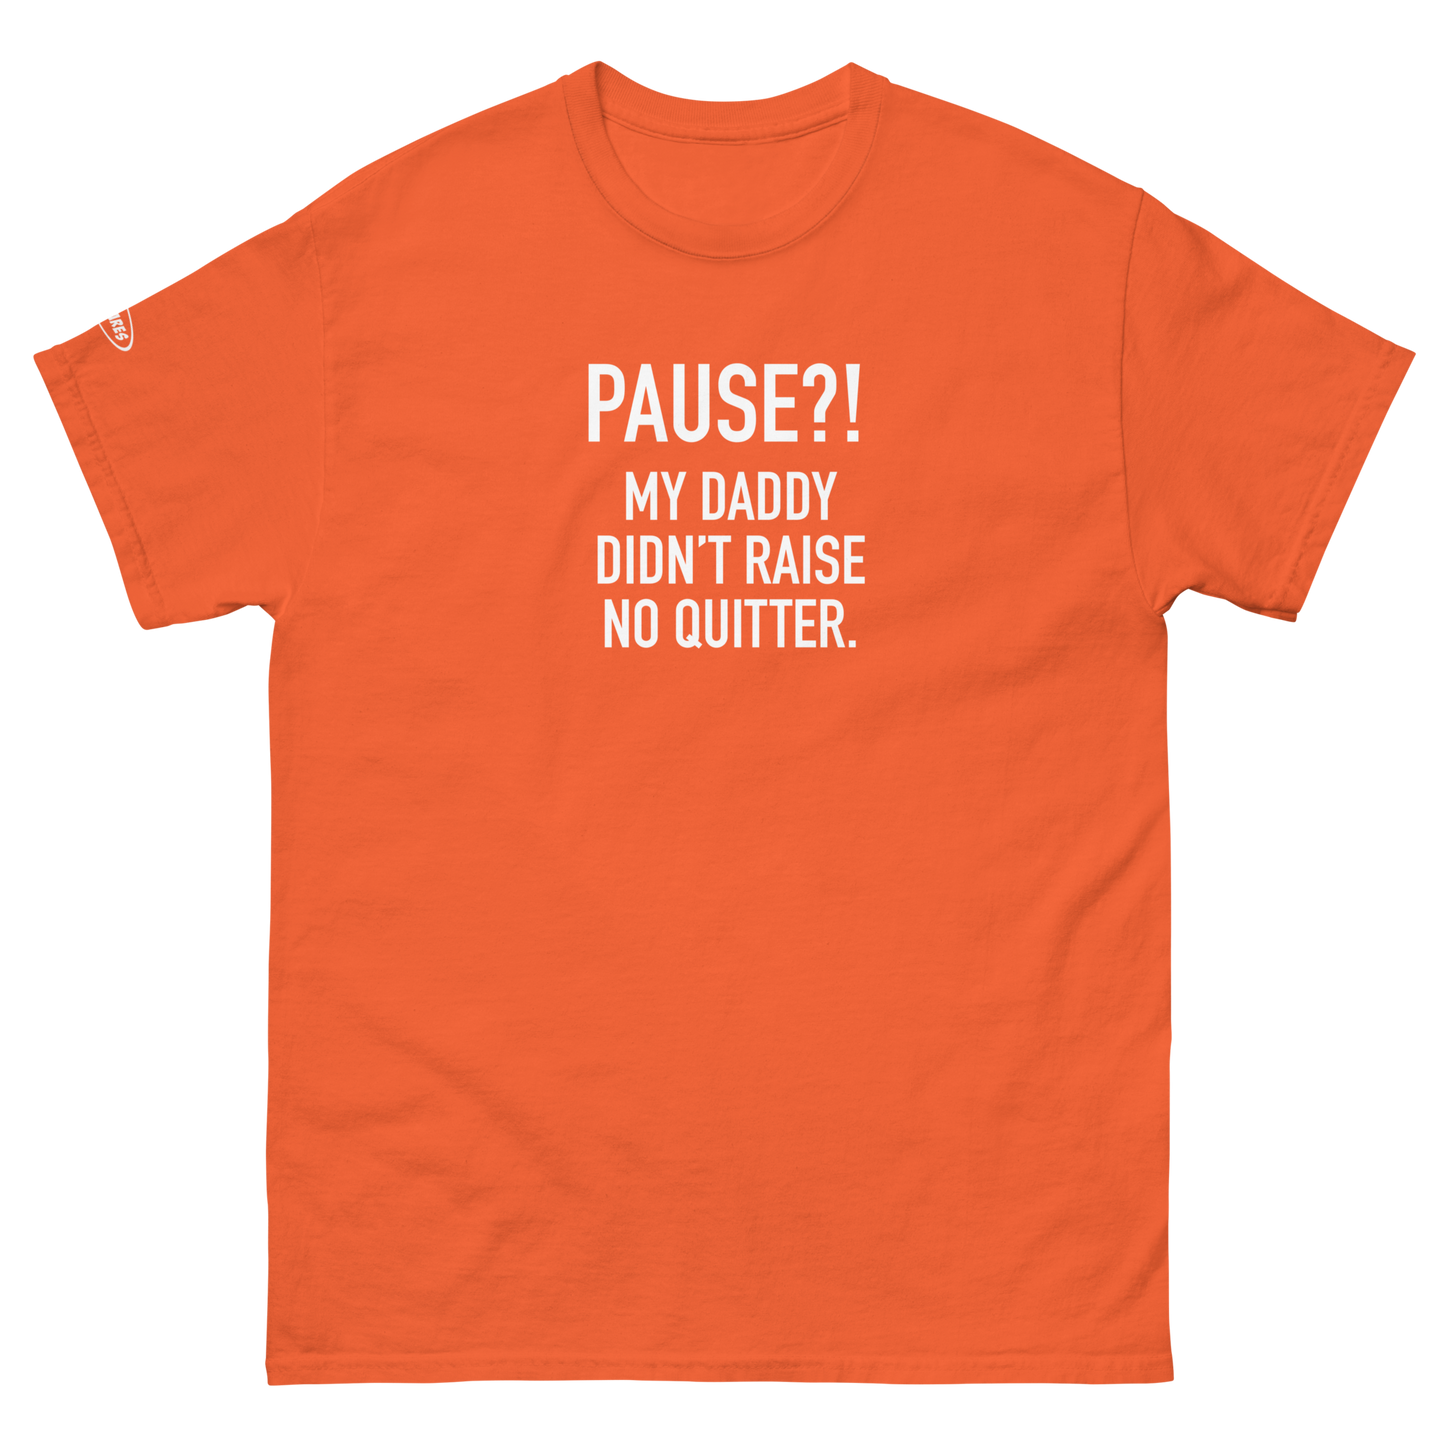 Unisex - GAMER - Pause?! My Daddy Didn't Raise No Quitter. - Funny T-Shirt